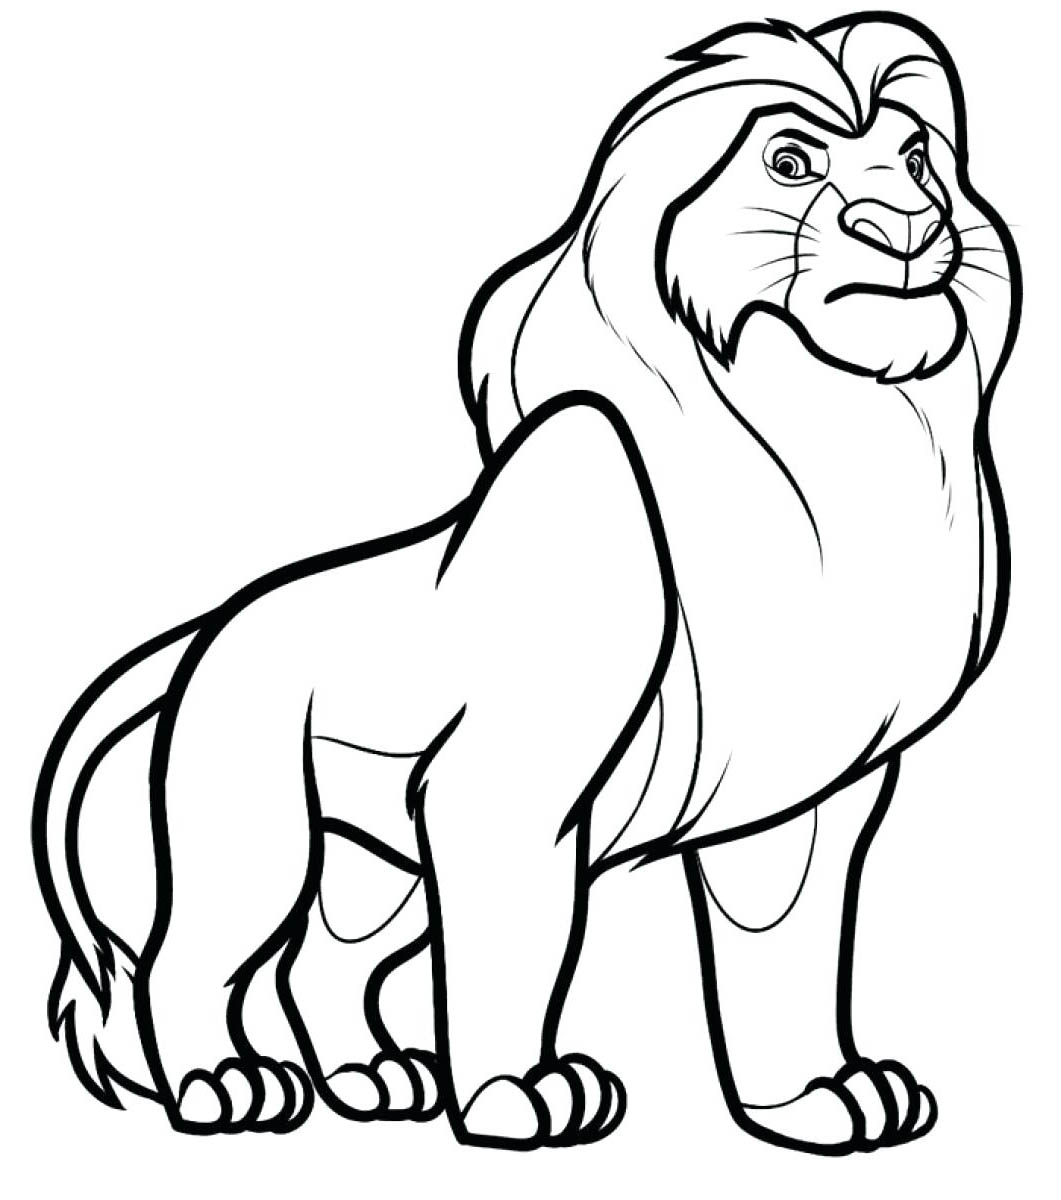 Lion to print - Lion Kids Coloring Pages